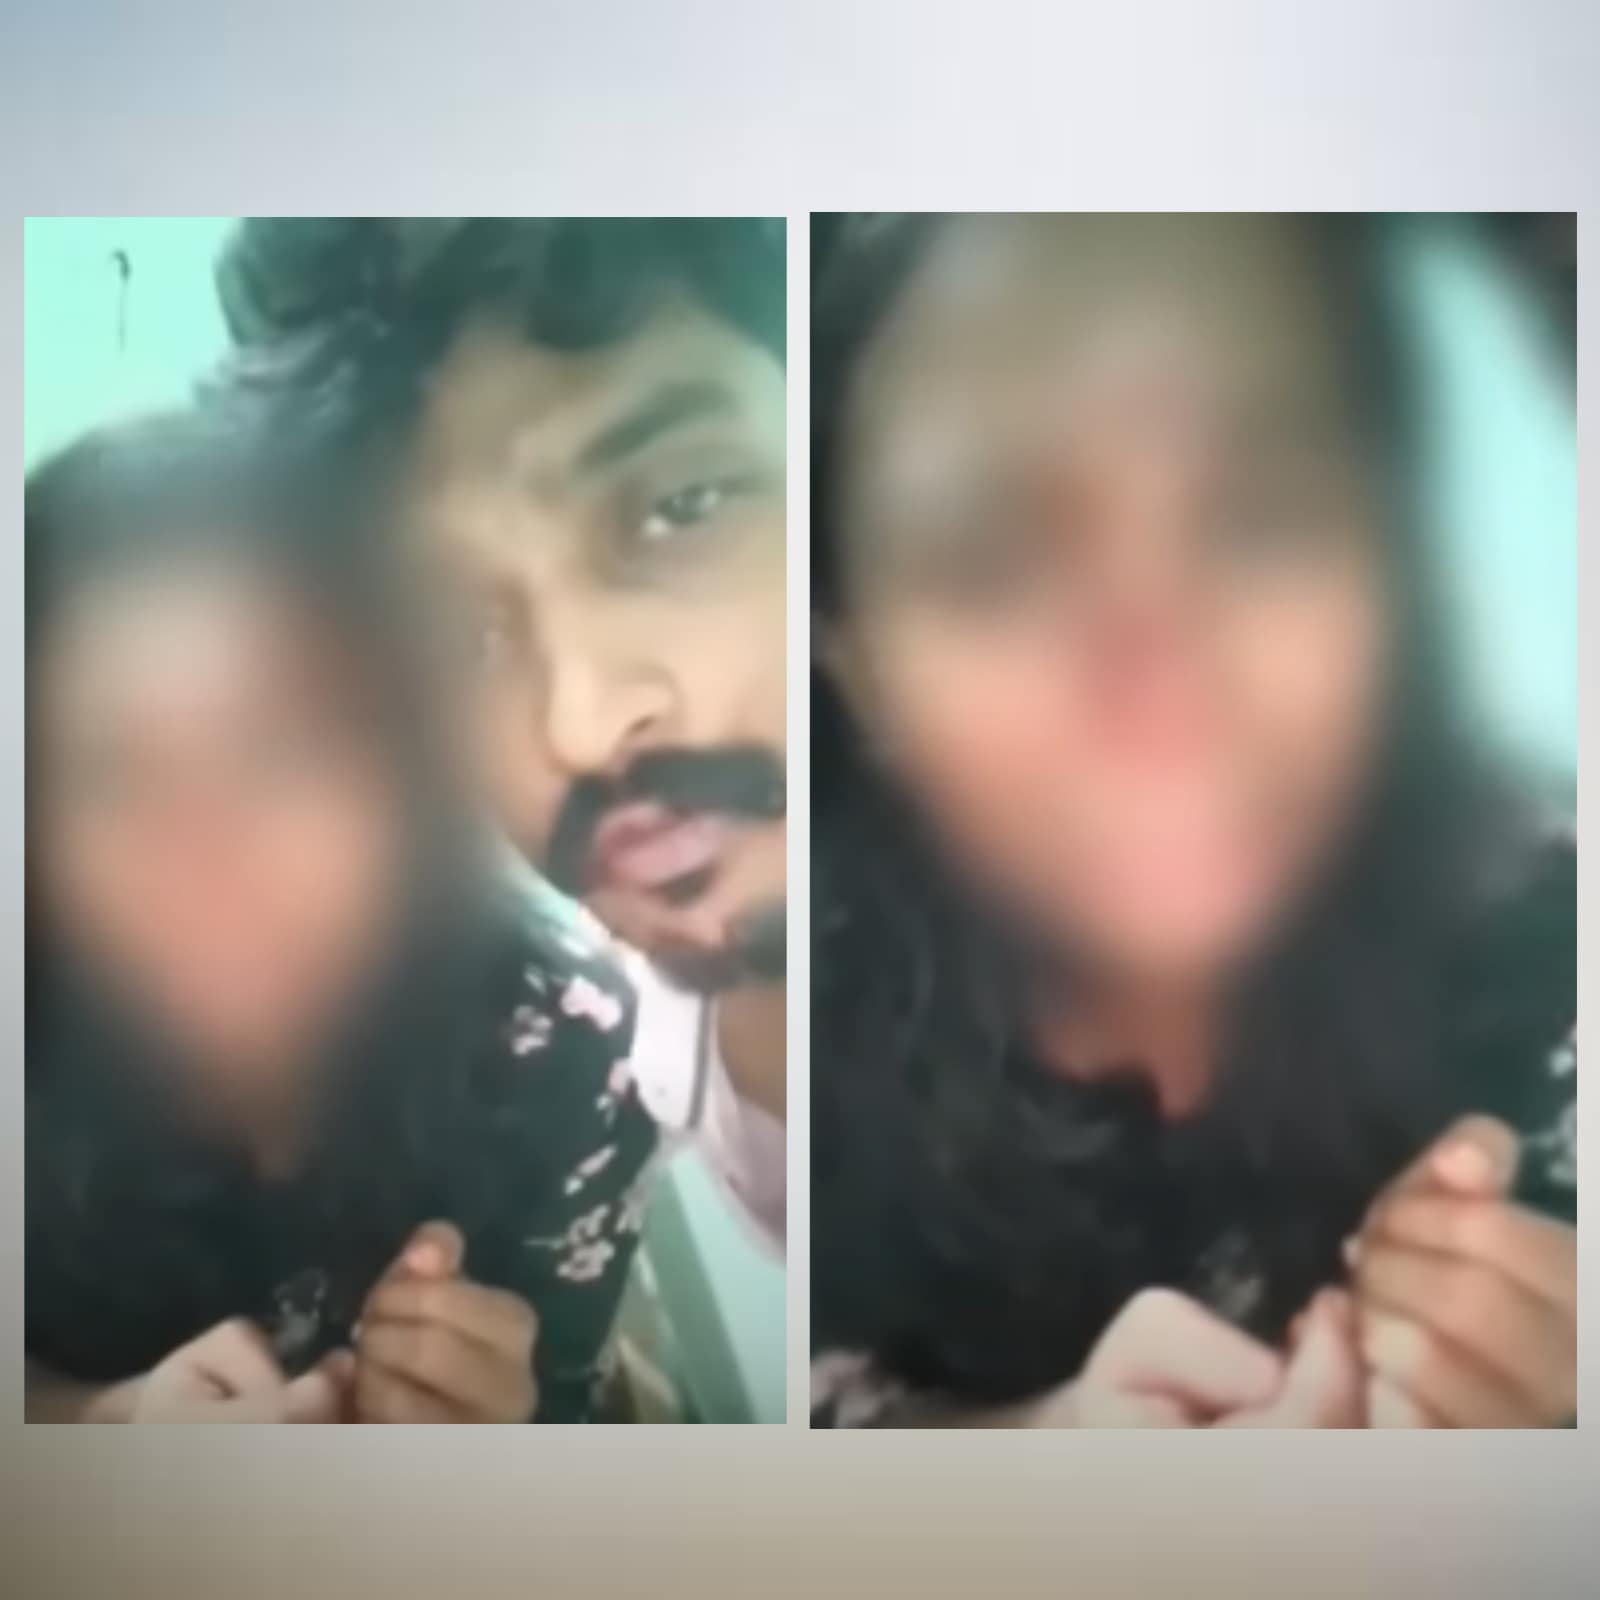 Kerala Man Thrashes Wife, Films Assault, Shares Video With Friends image